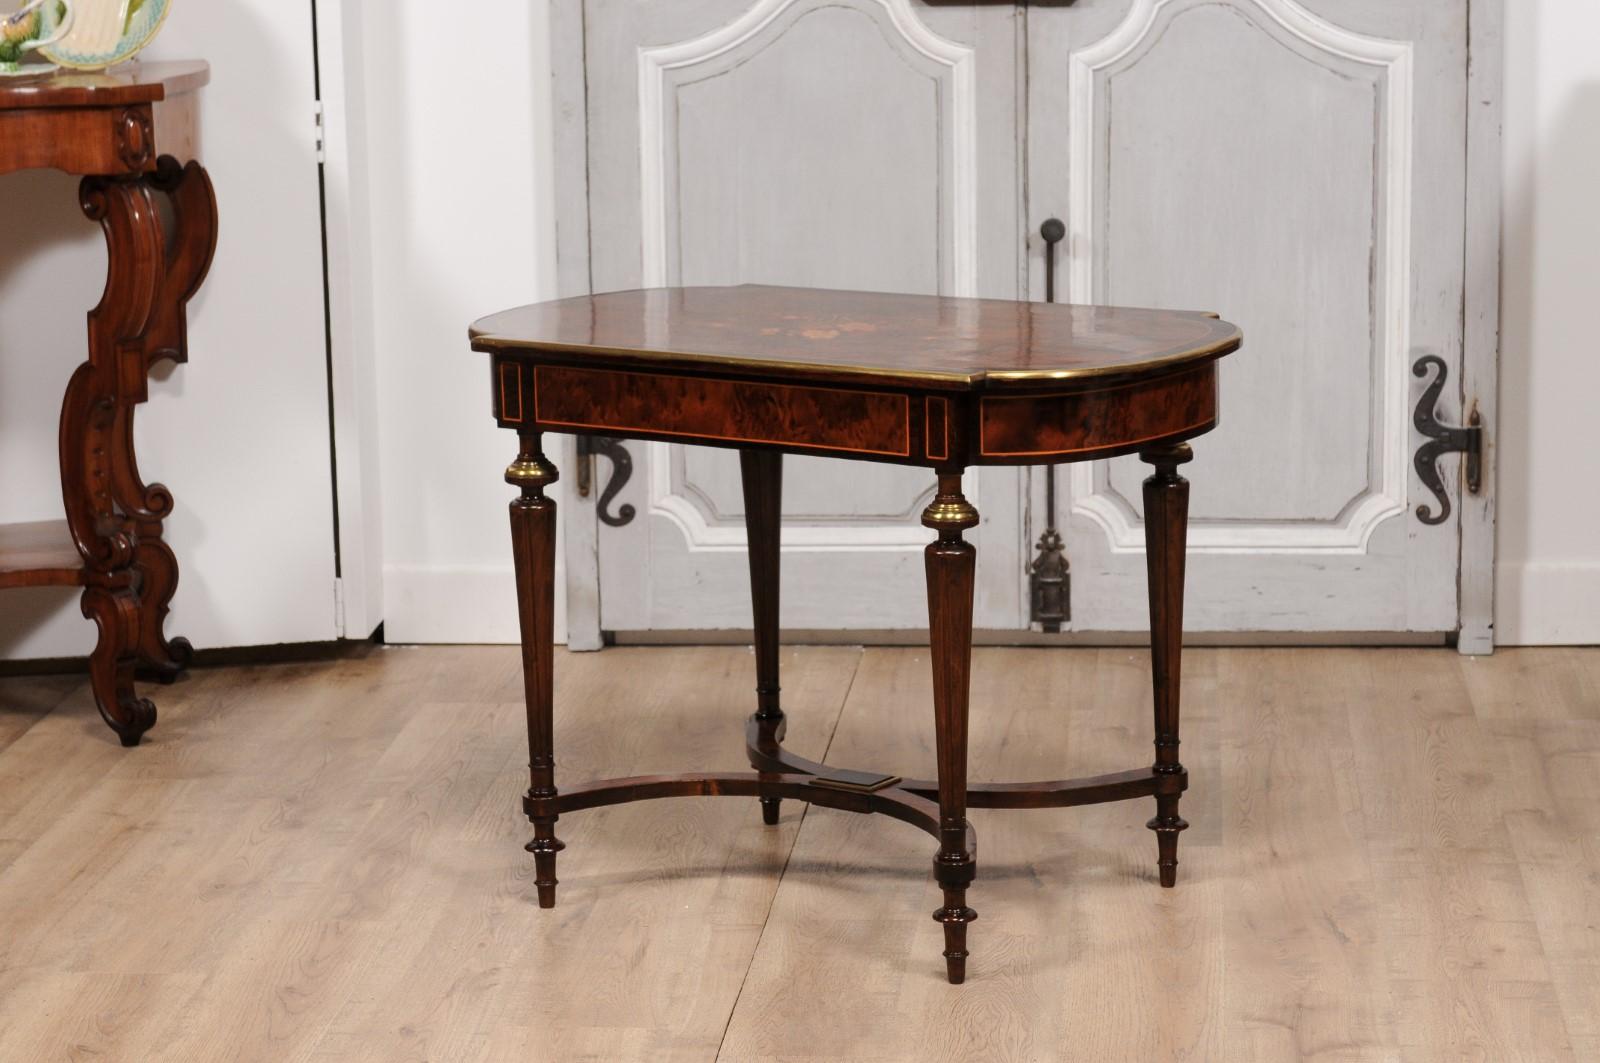 Italian 1890s Walnut, Mahogany and Brass Side Table with Floral Marquetry Décor For Sale 5